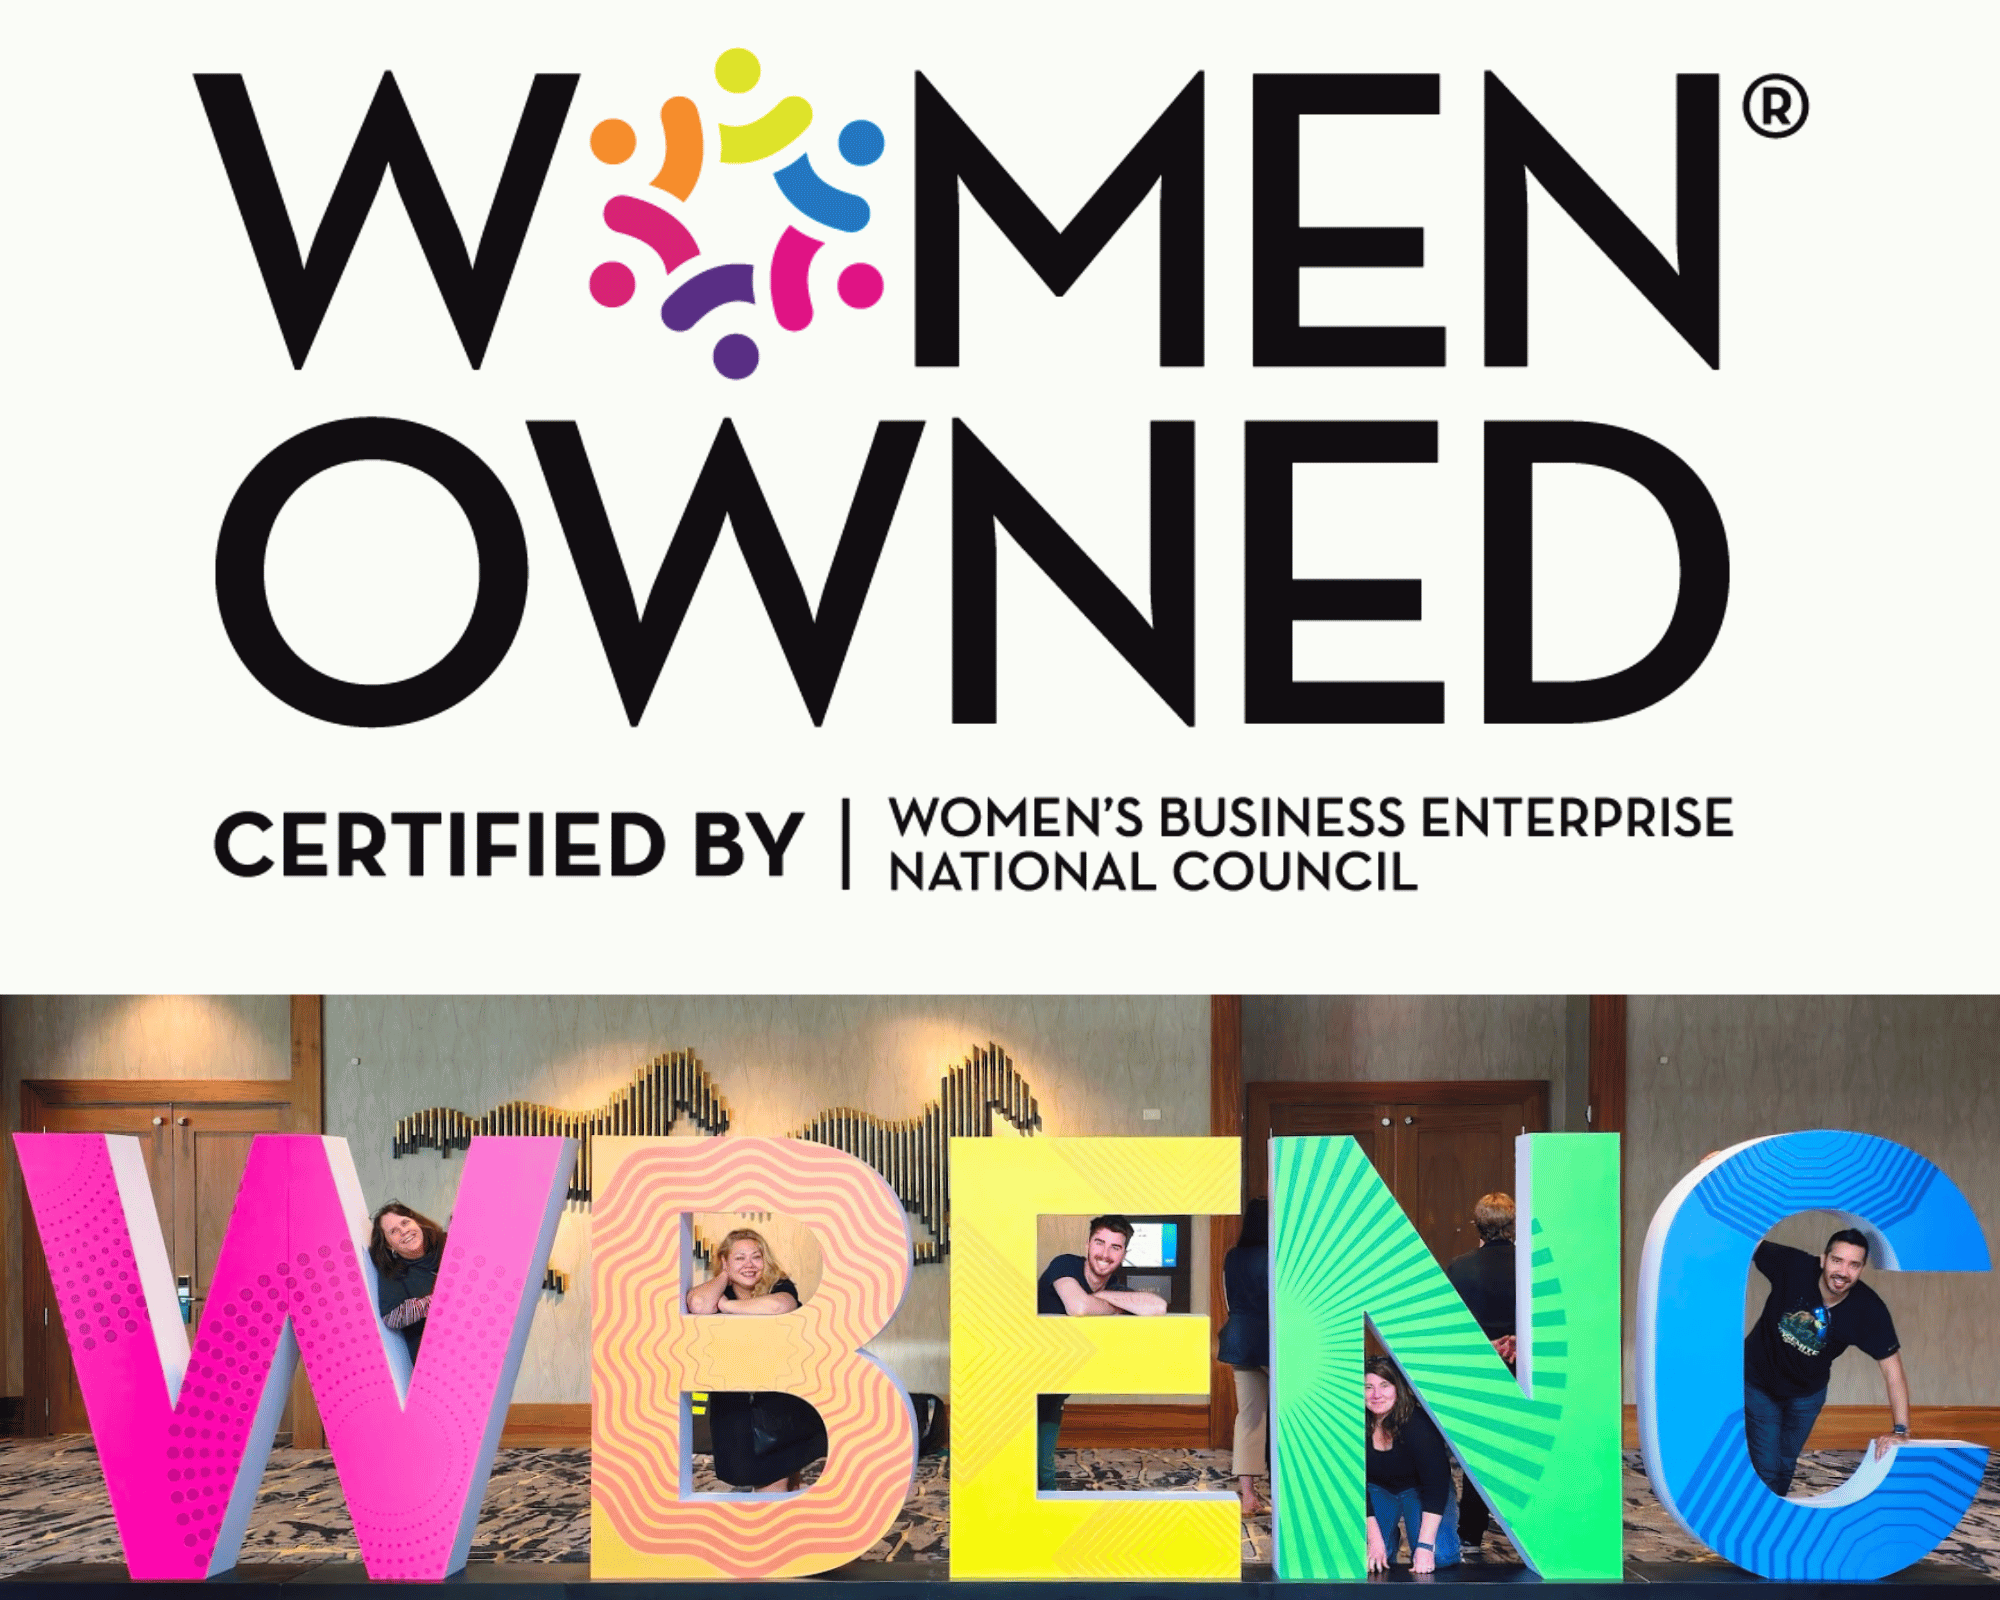 Women Owned Business Certification Logo, picture of our team members posing behind each letter in WBENC - a life-sized conference lobby decoration.